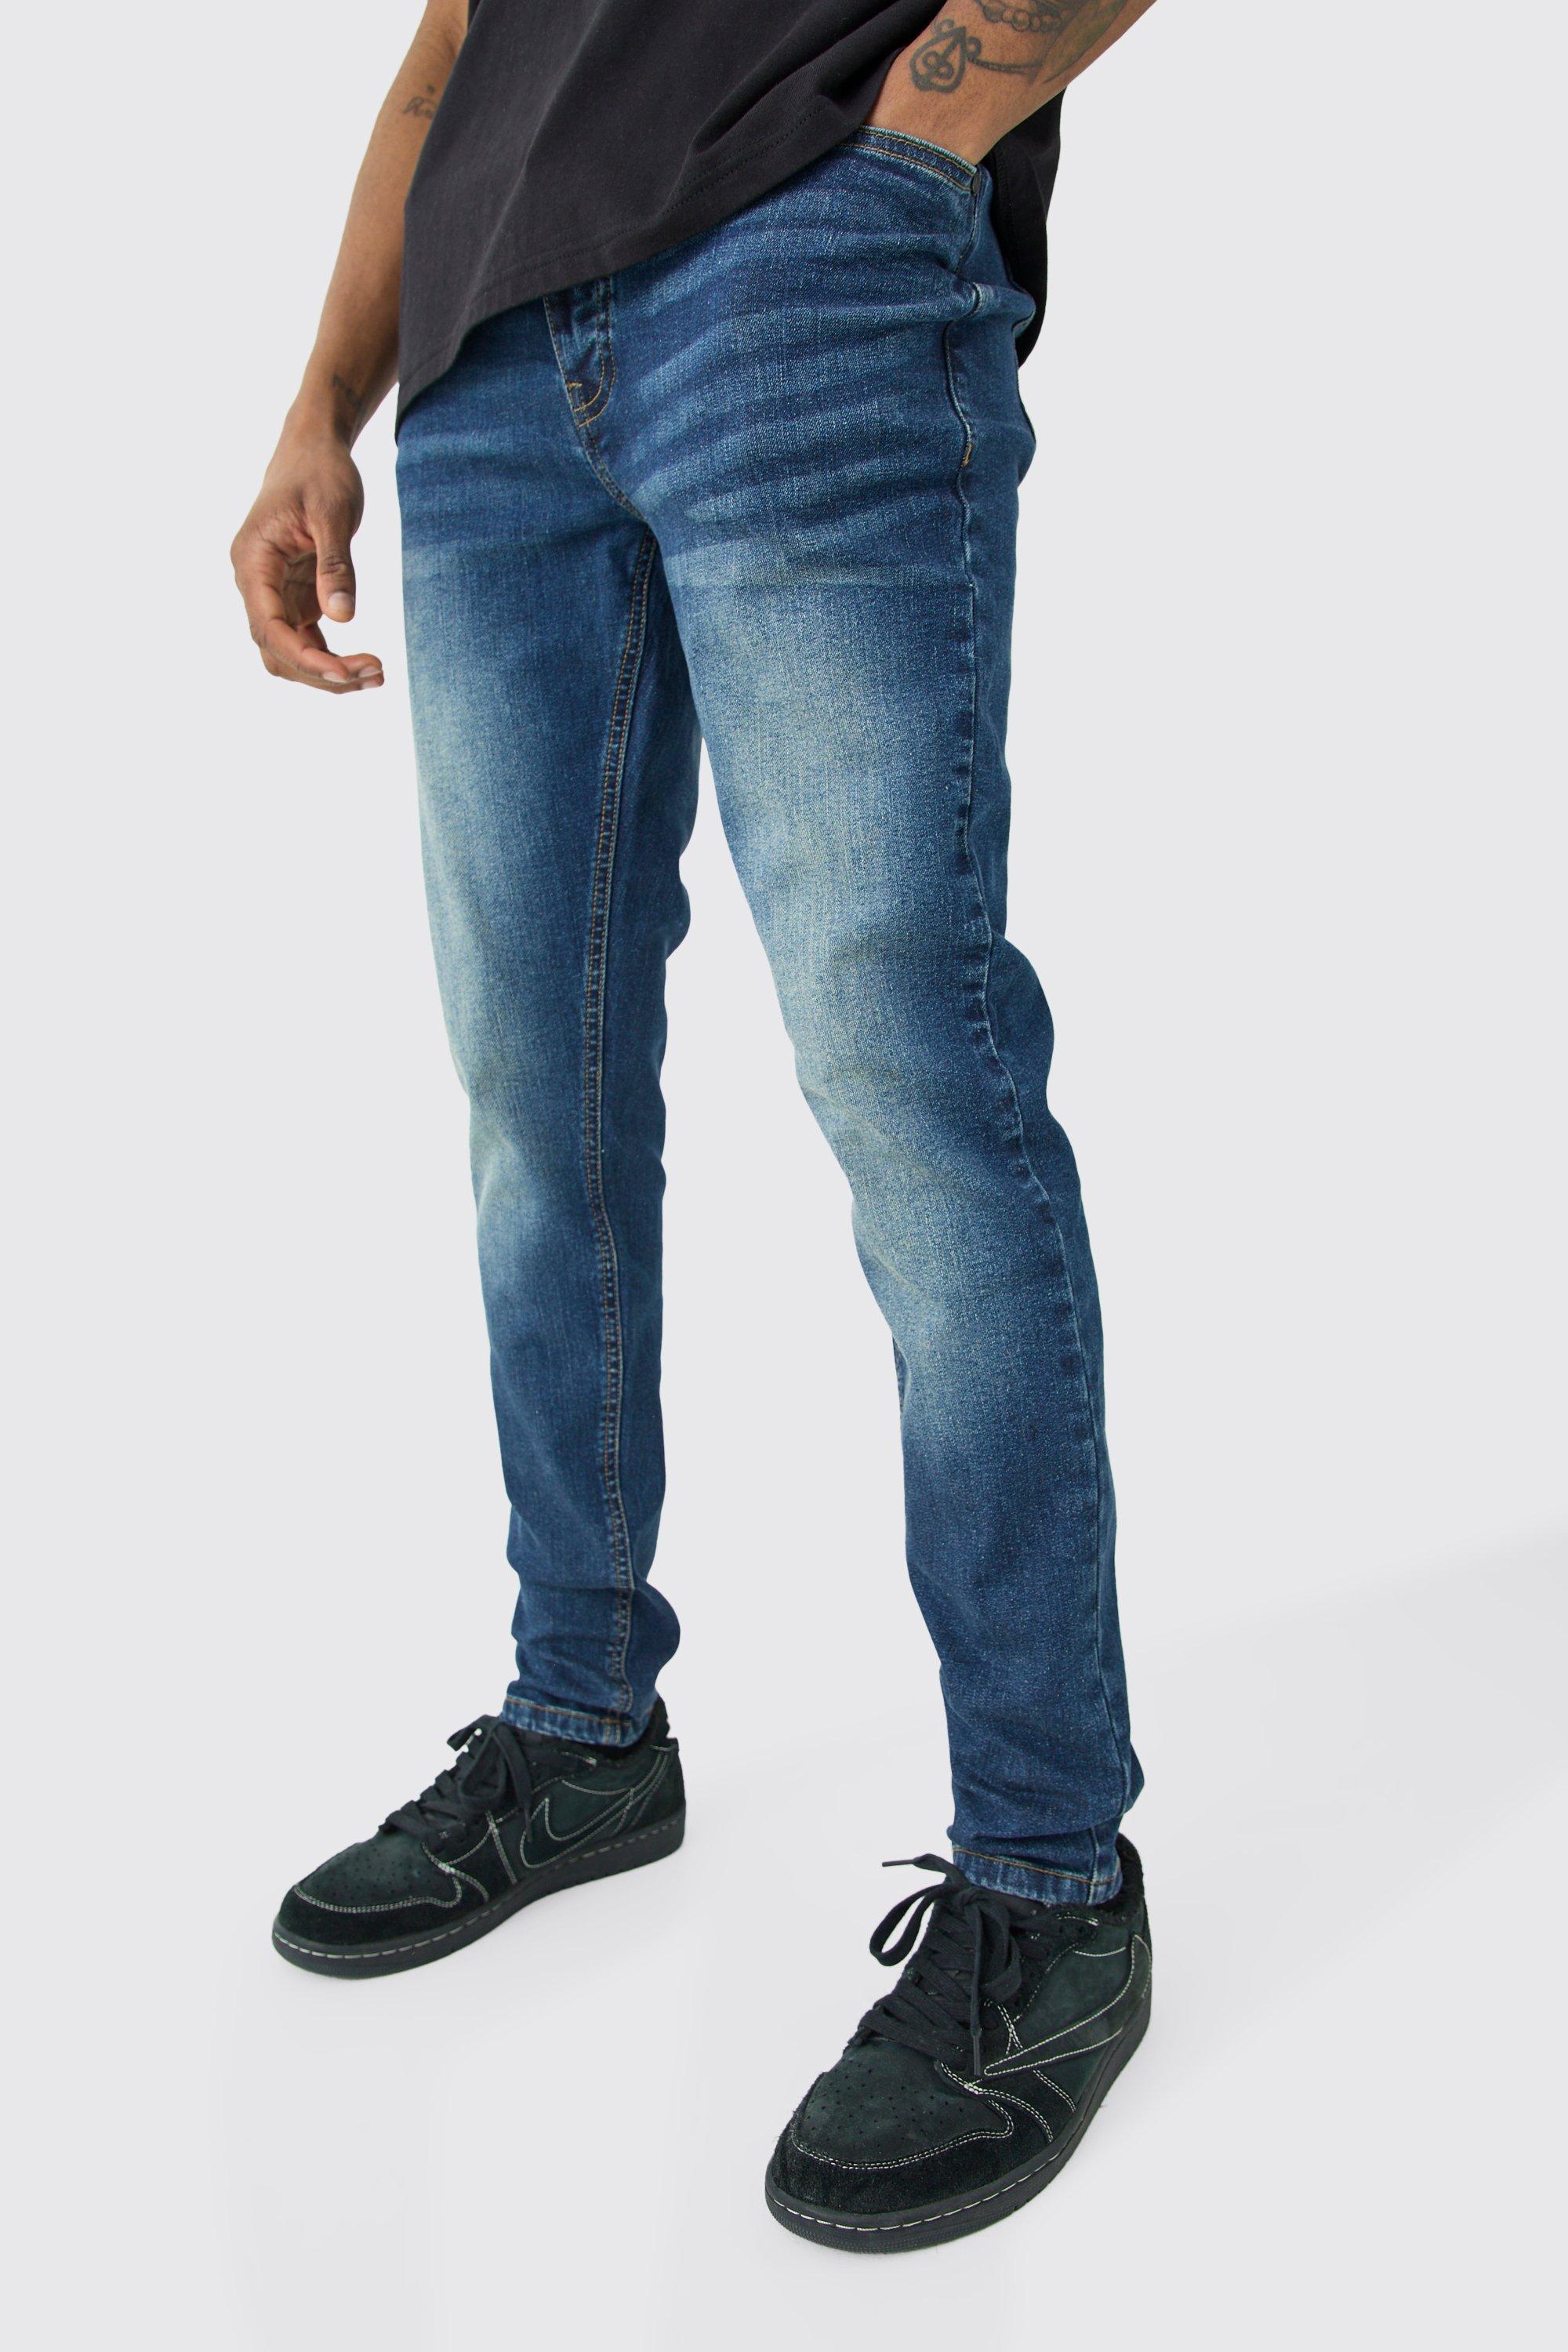 Image of Tall Skinny Stretch Jean In Antique Blue, Azzurro